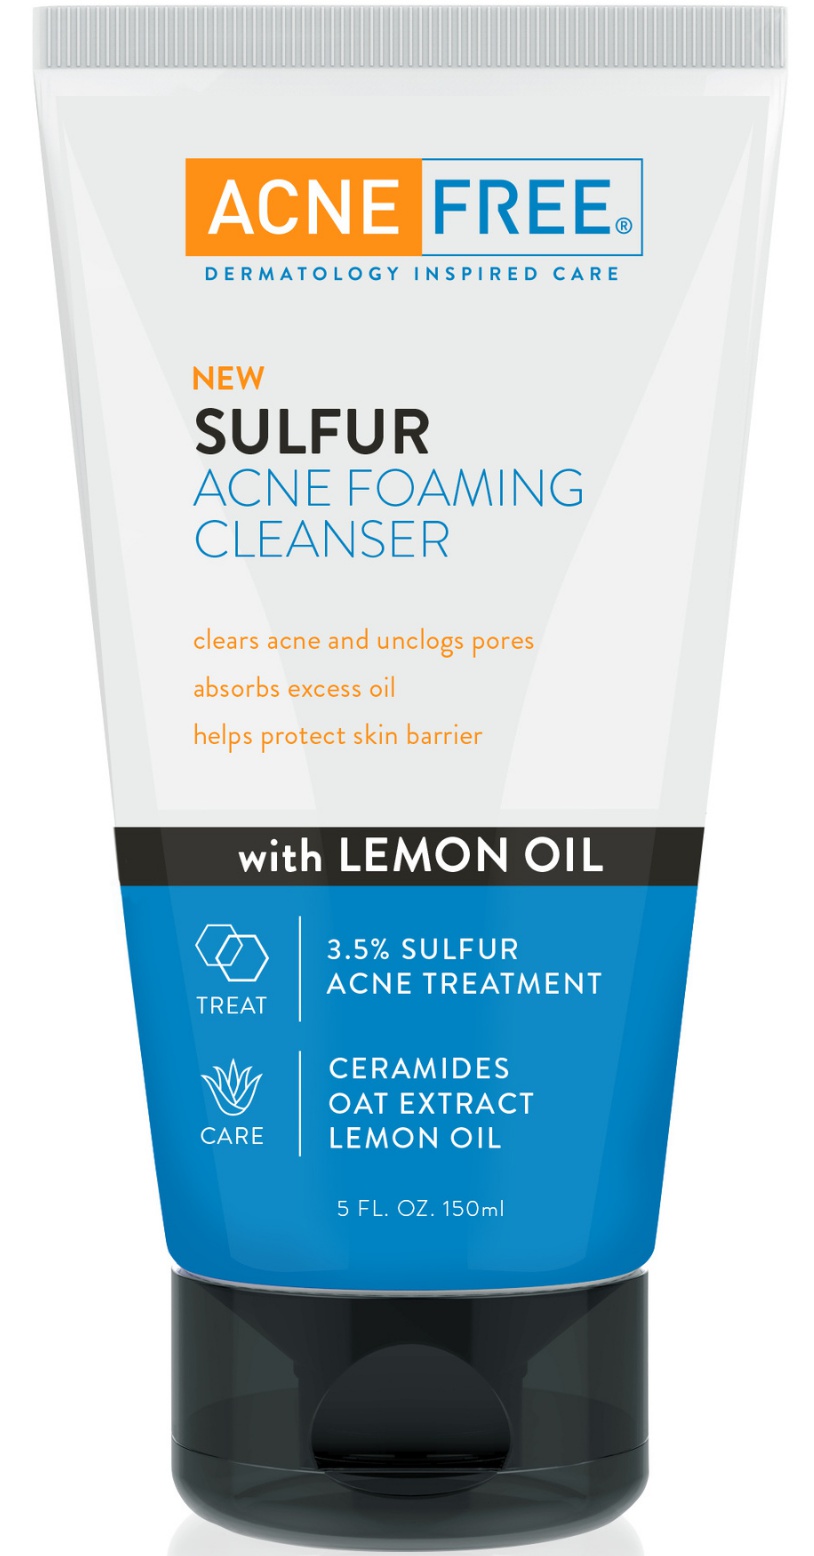 AcneFree Sulfur Acne Foaming Cleanser